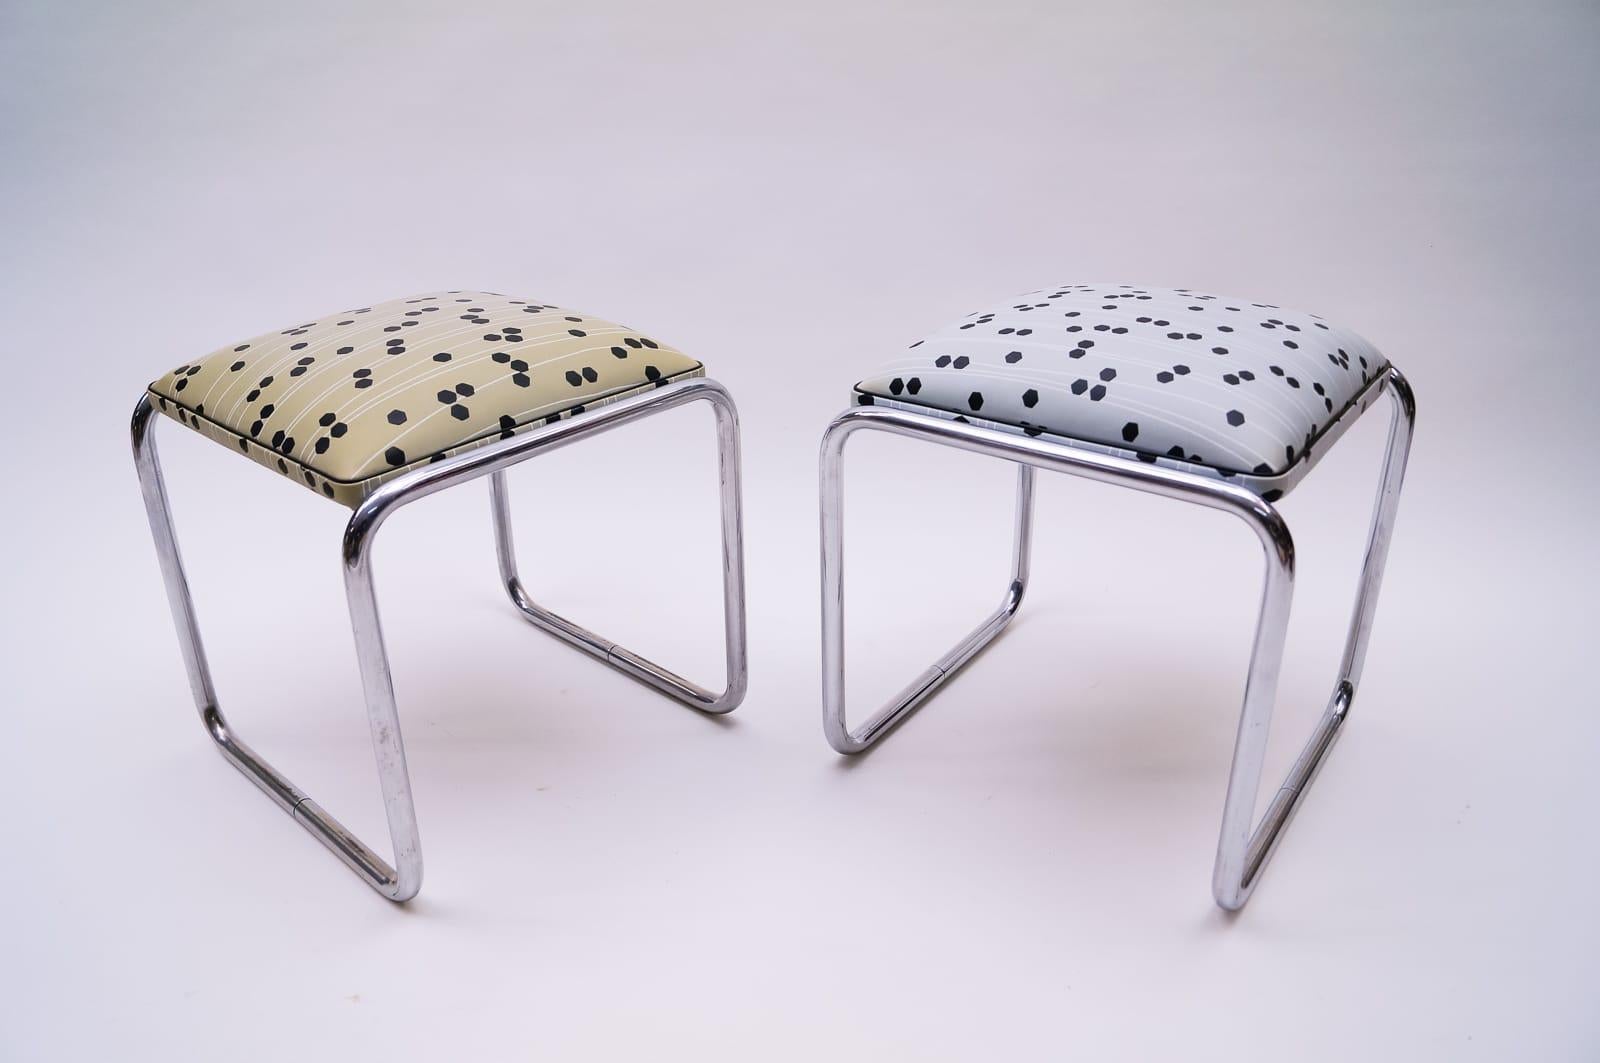 Mid-20th Century Pair of Tubular Steel Bauhaus Stools with Graphic Patterns, 1940s, Germany